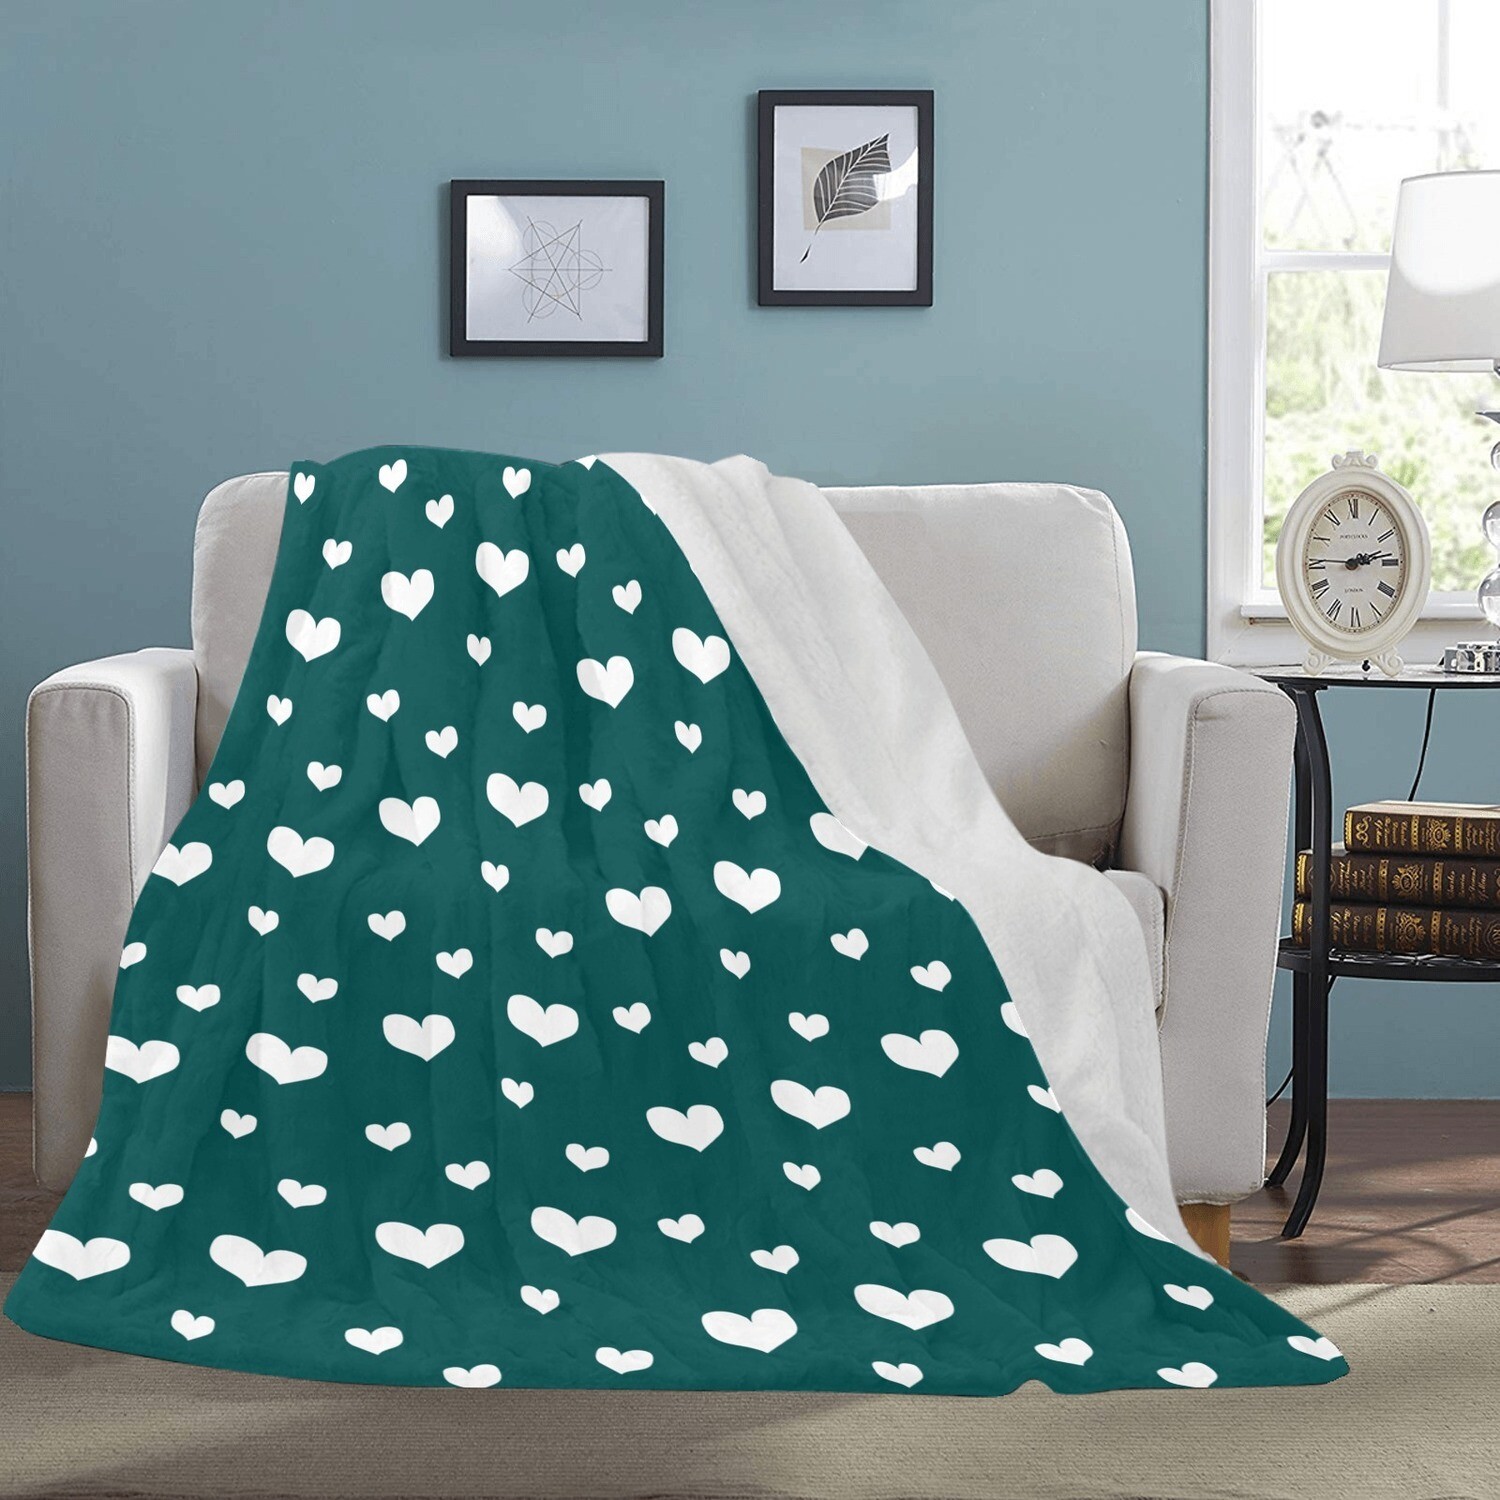 🤴🏽👸🏽💕Large Ultra-Soft Micro Fleece Blanket Valentine white hearts on dark teal, gift, gift for her, gift for him, gift for them, 70"x80"